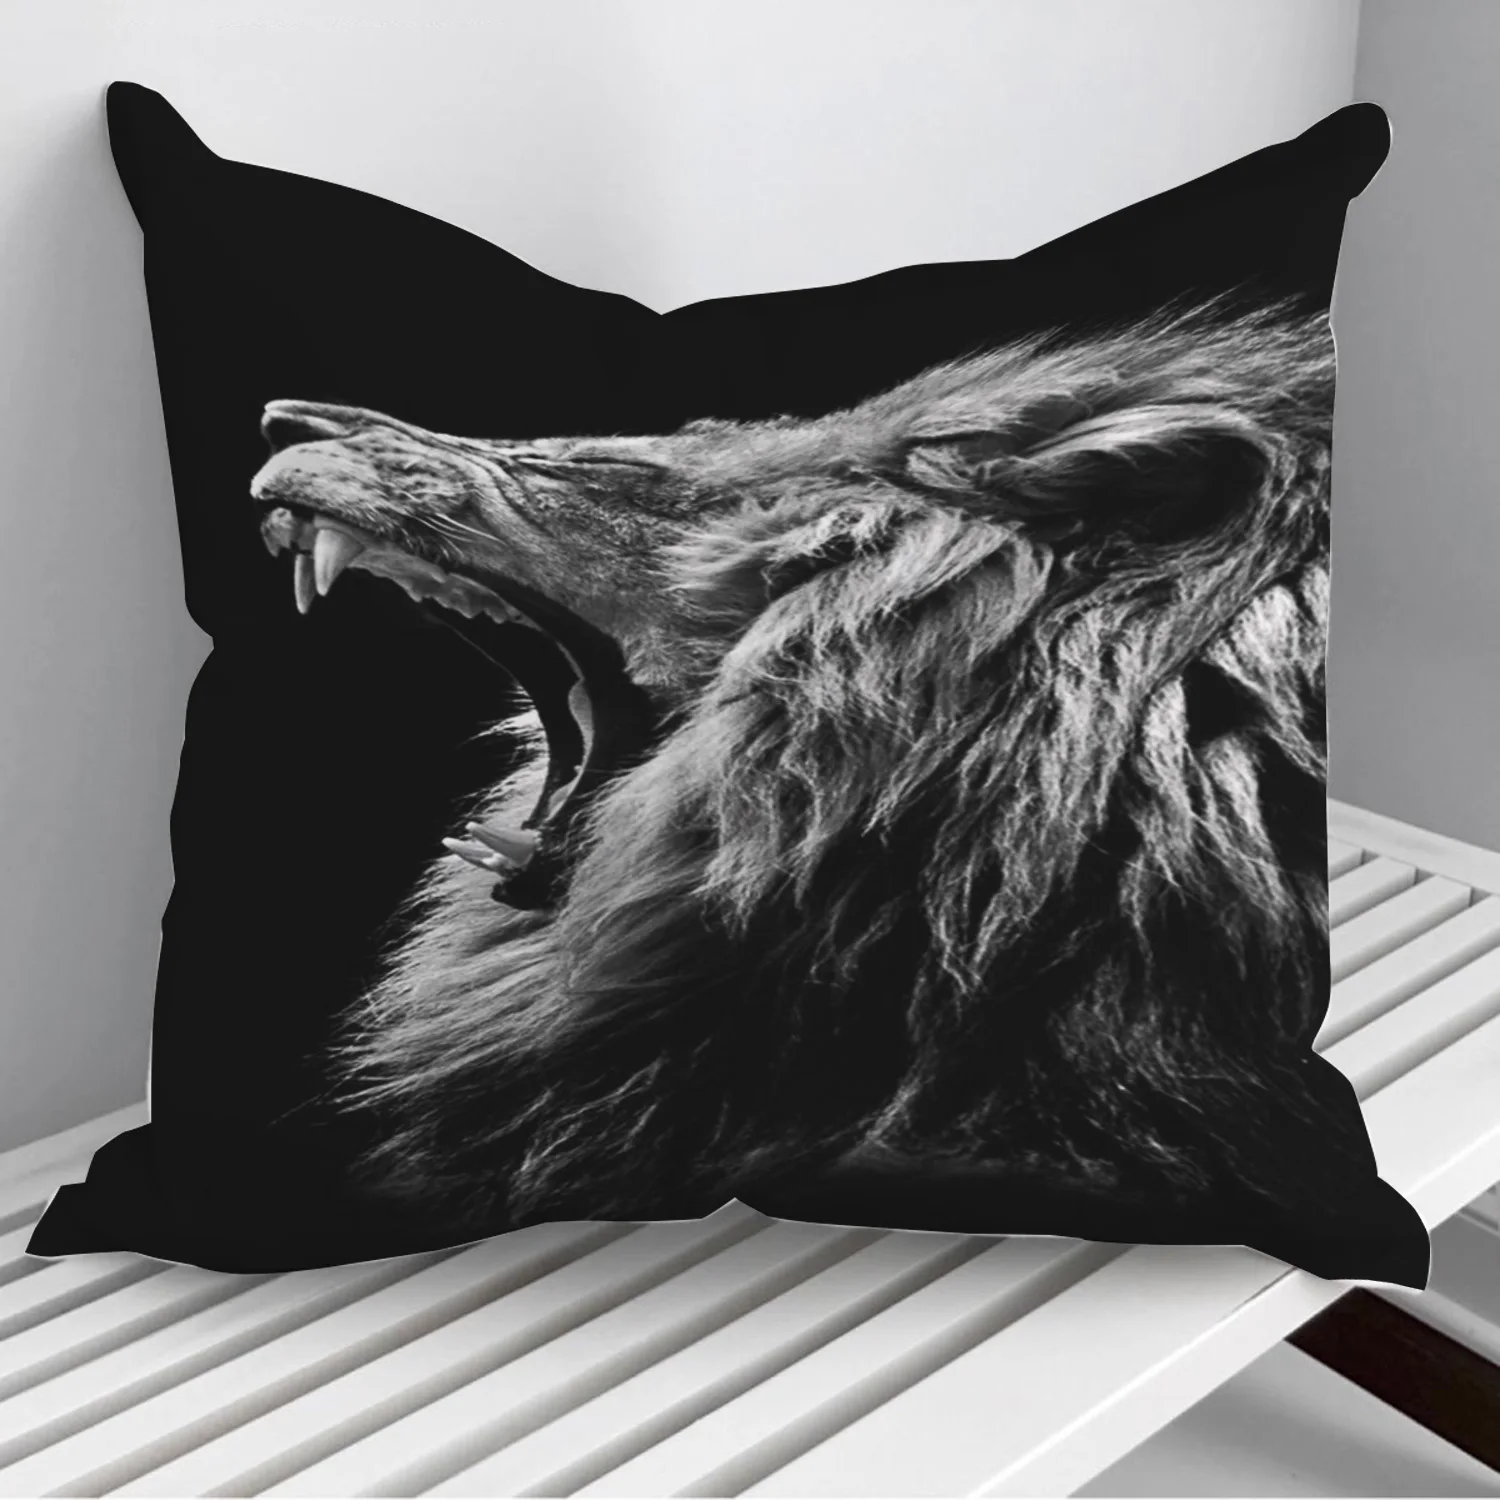 

angry wild lion poster Throw Pillows Cushion Cover On Sofa Home Decor 45*45cm 40*40cm Gift Pillowcase Cojines Dropshipping